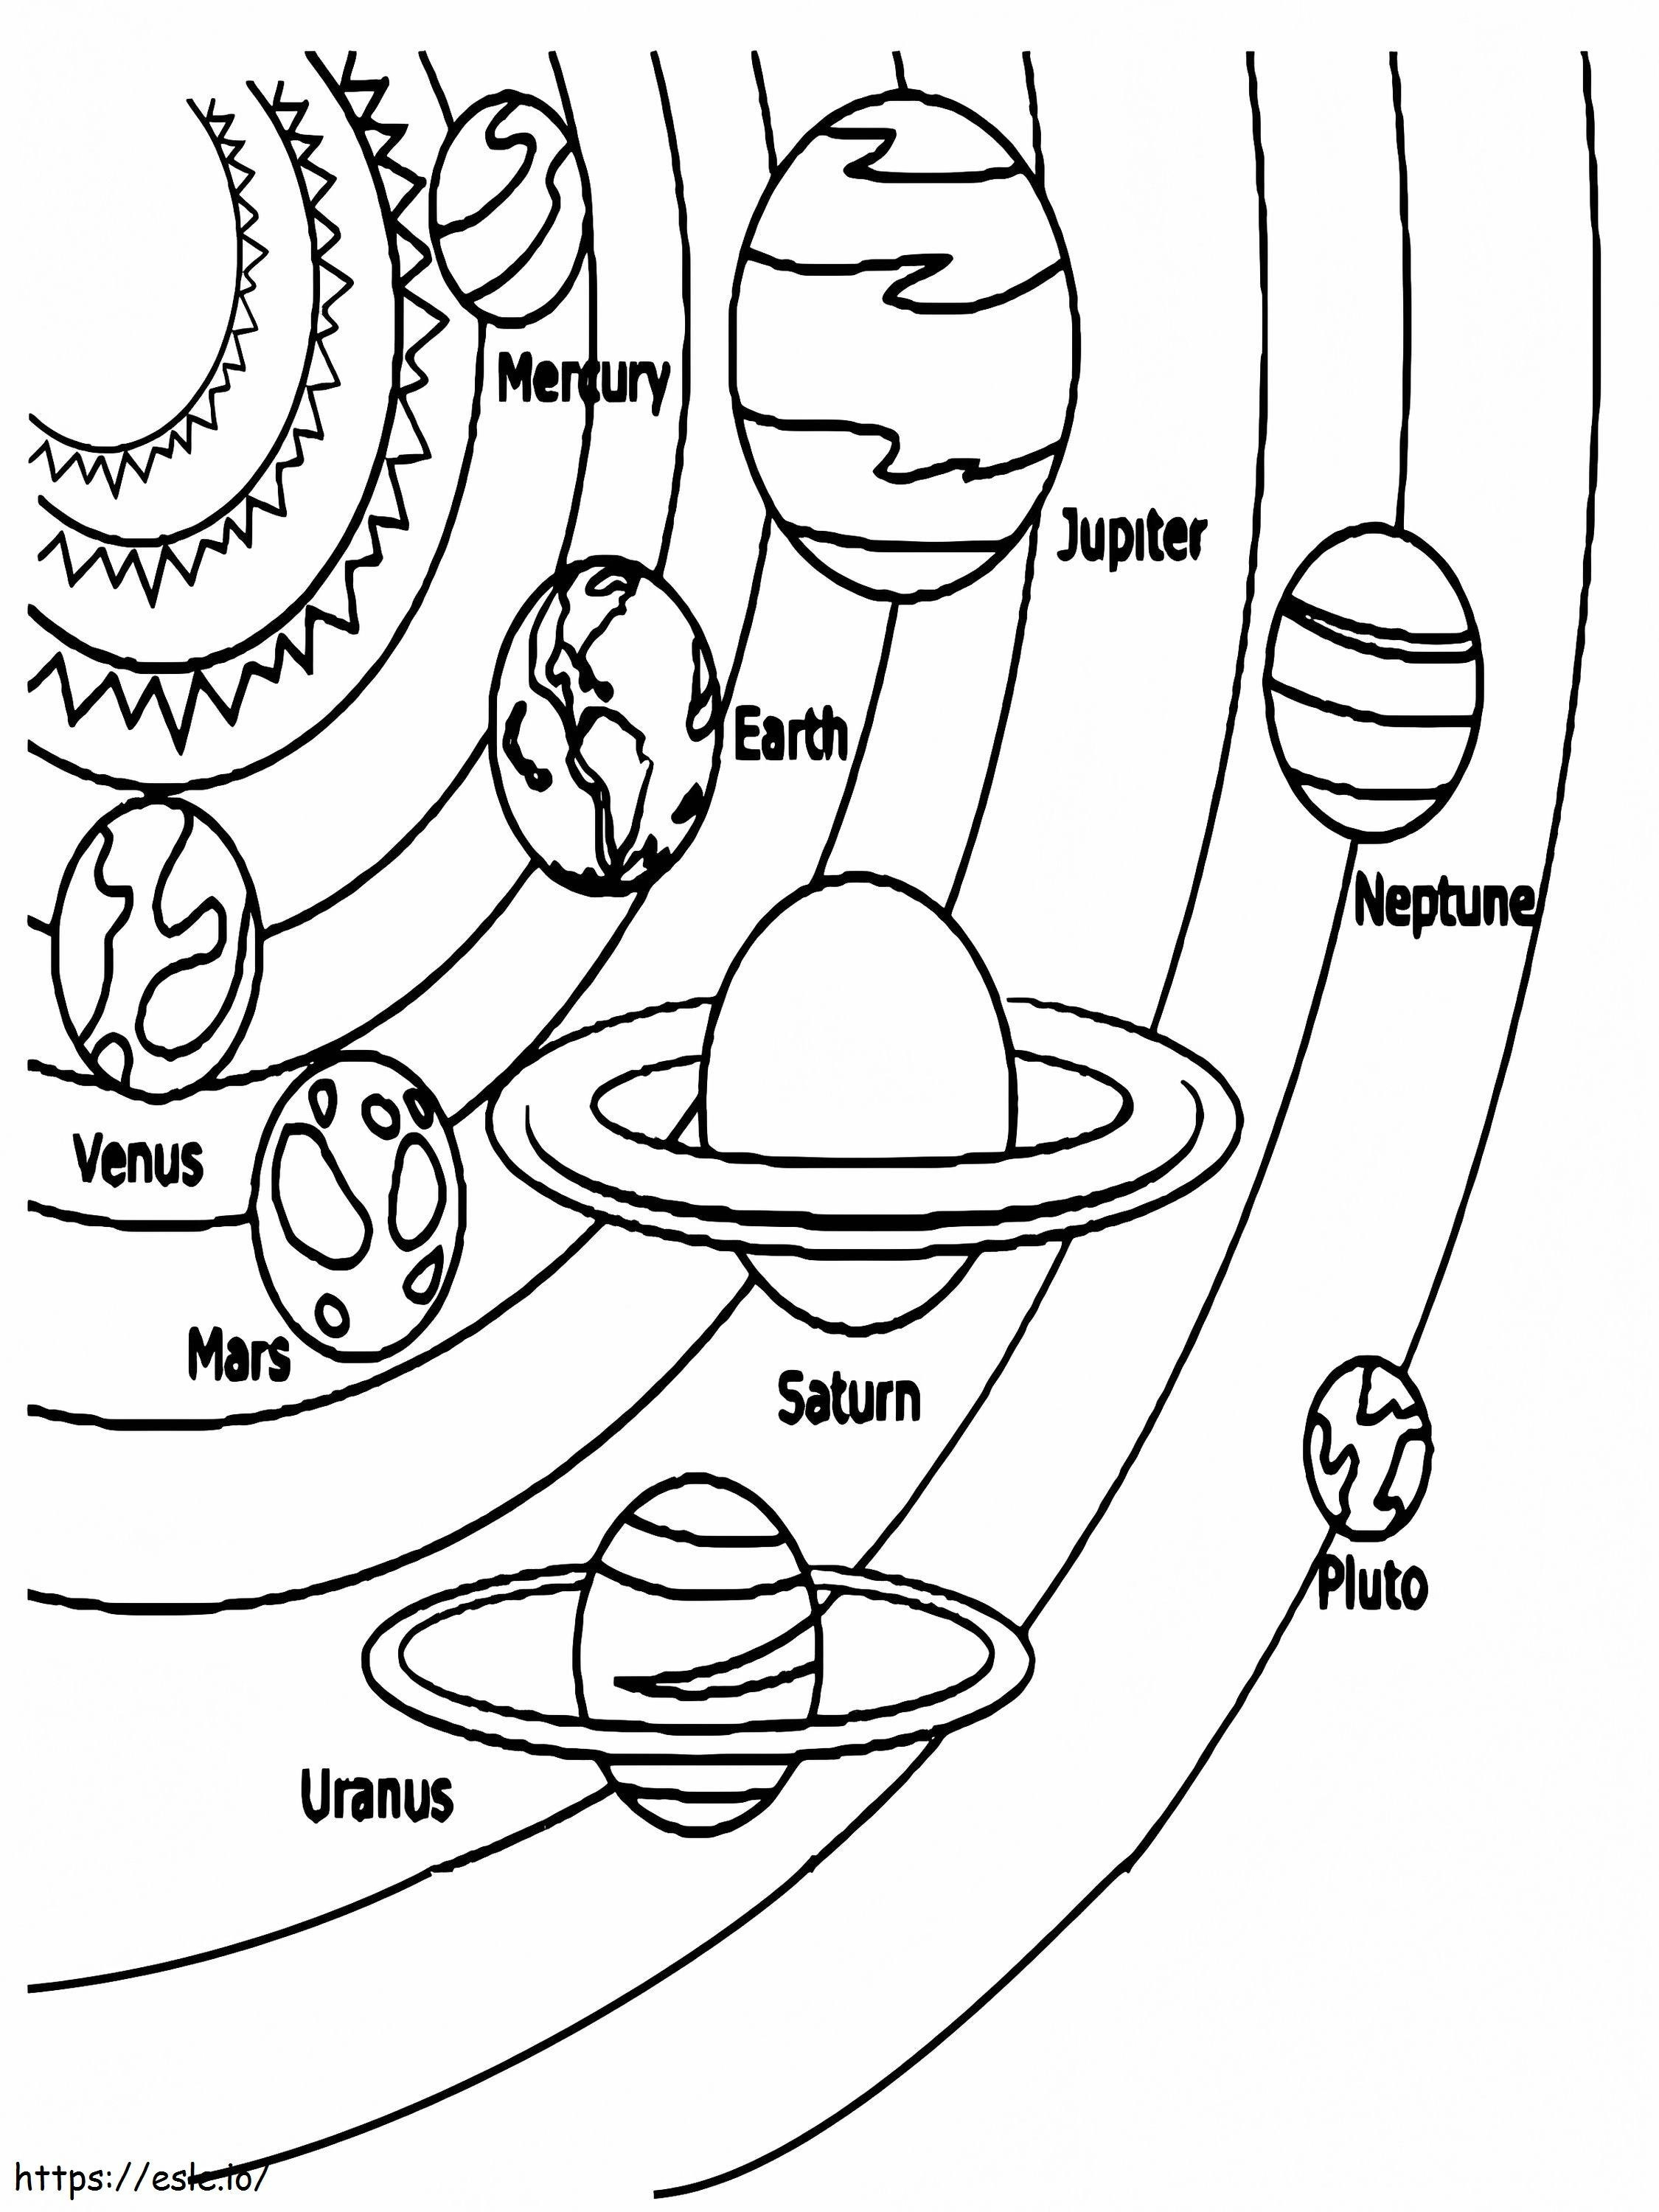 Precise Planets In The Solar System coloring page